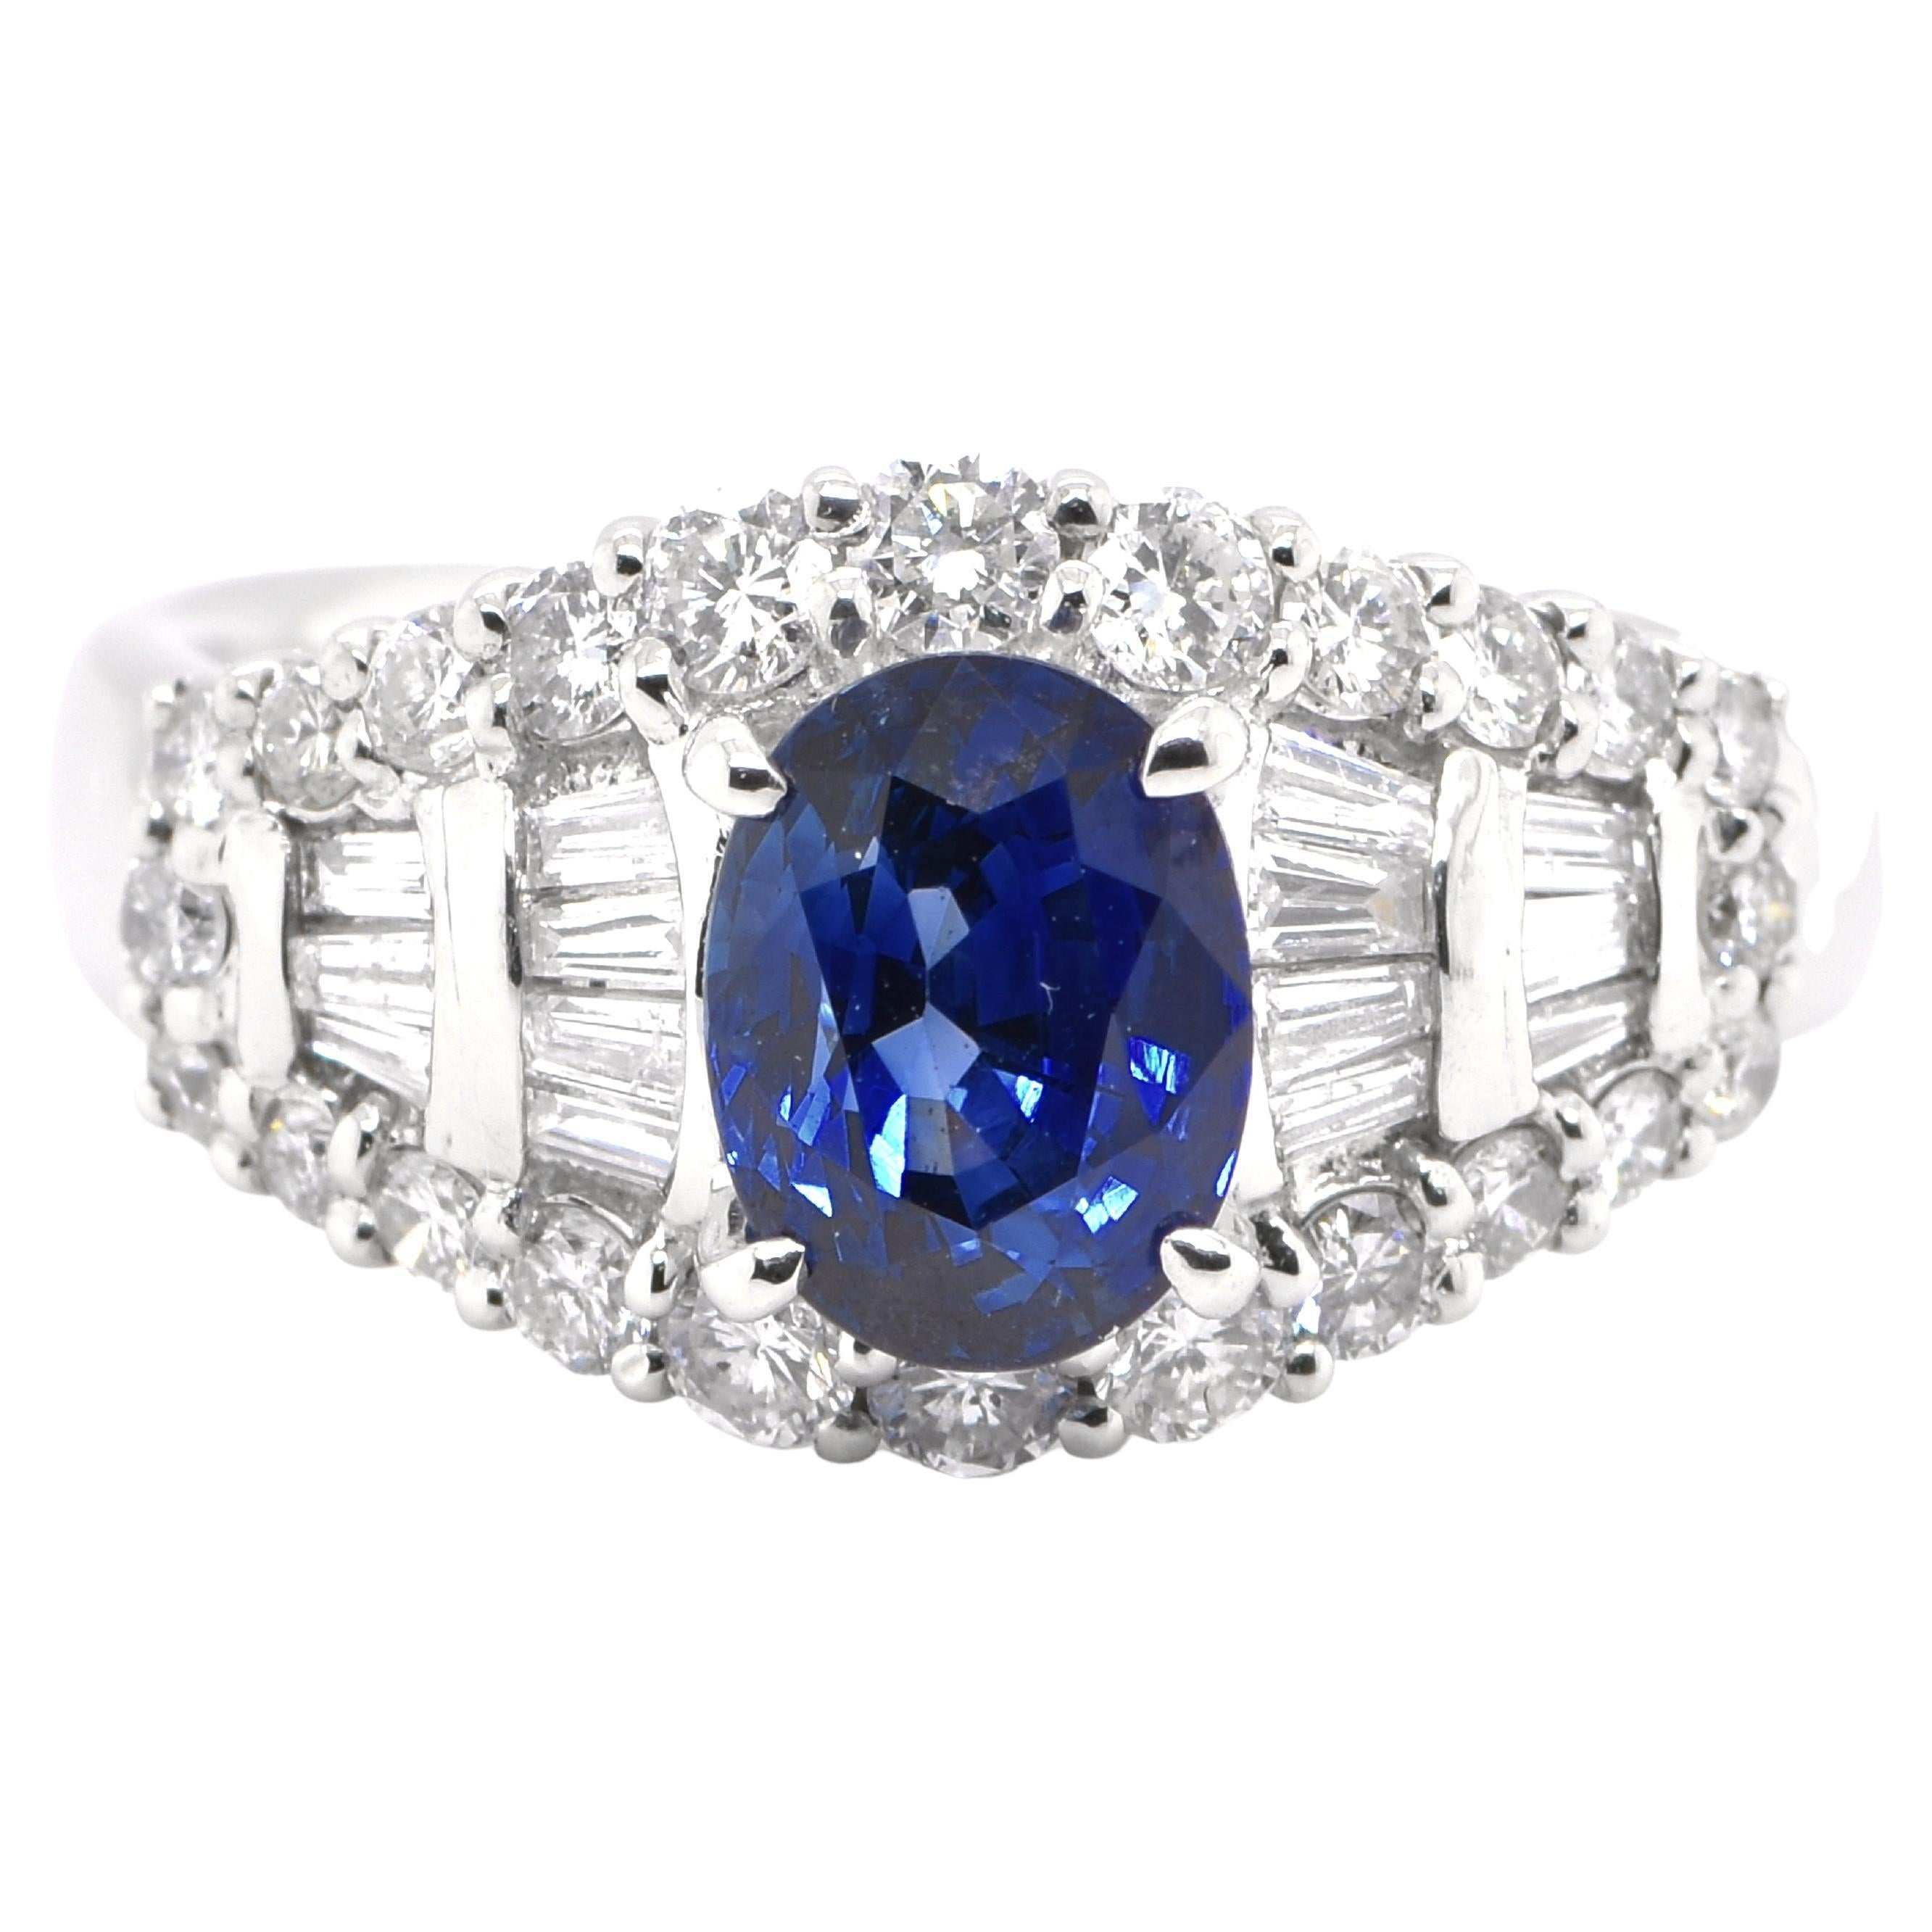 2.02 Carat Natural Sapphire and Diamond Art Deco Style Ring Set in Platinum